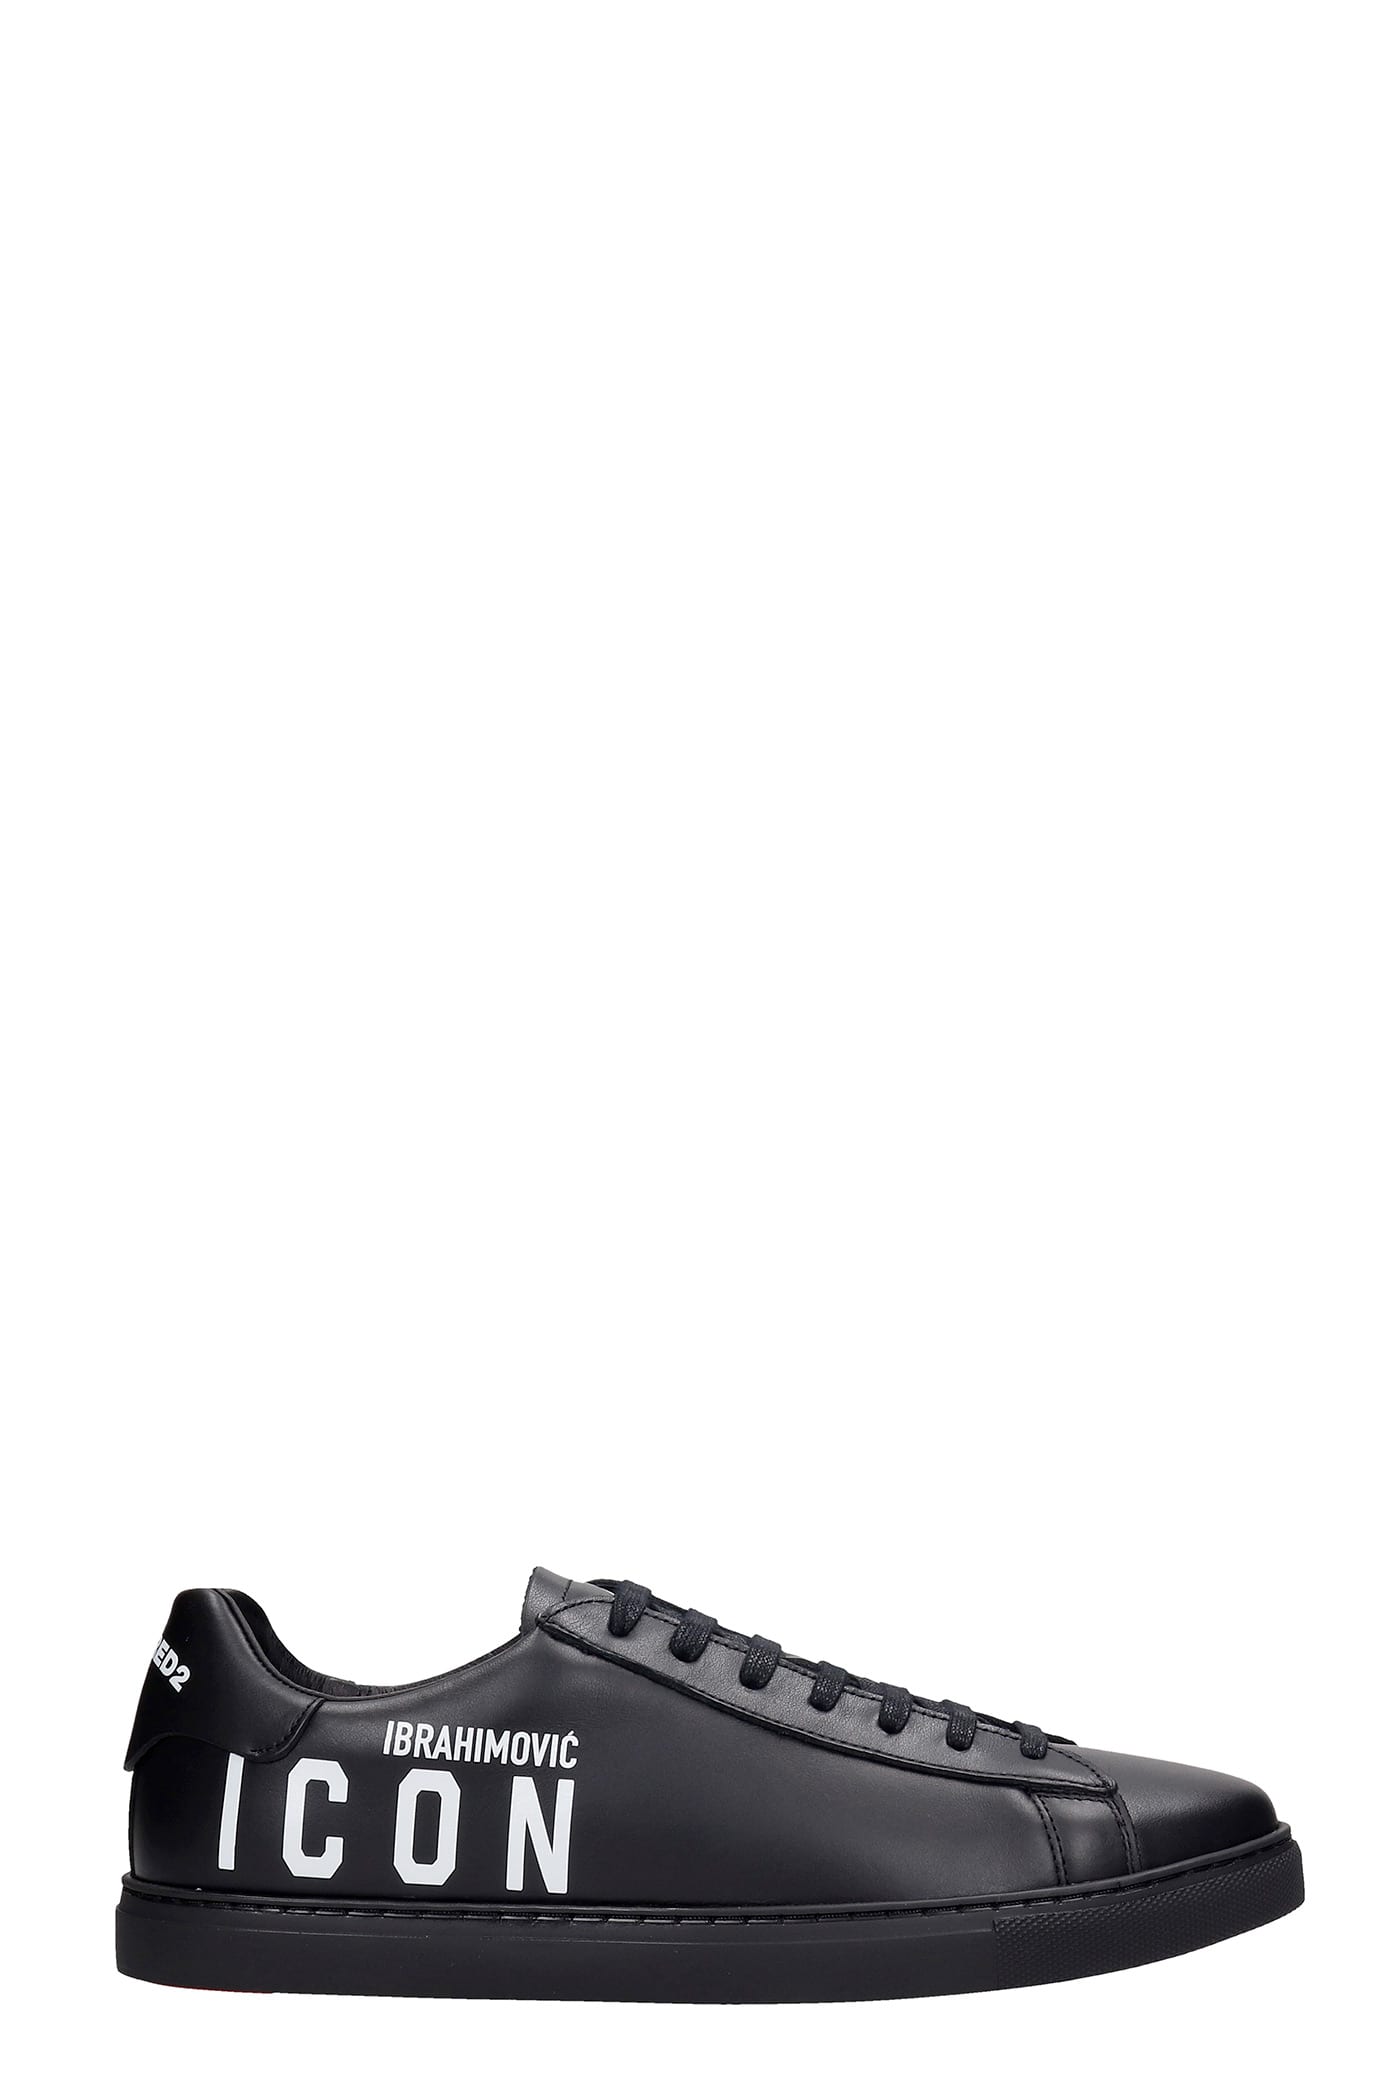 Dsquared2 D2xibra Icon New Tennis Sneakers In Black Leather